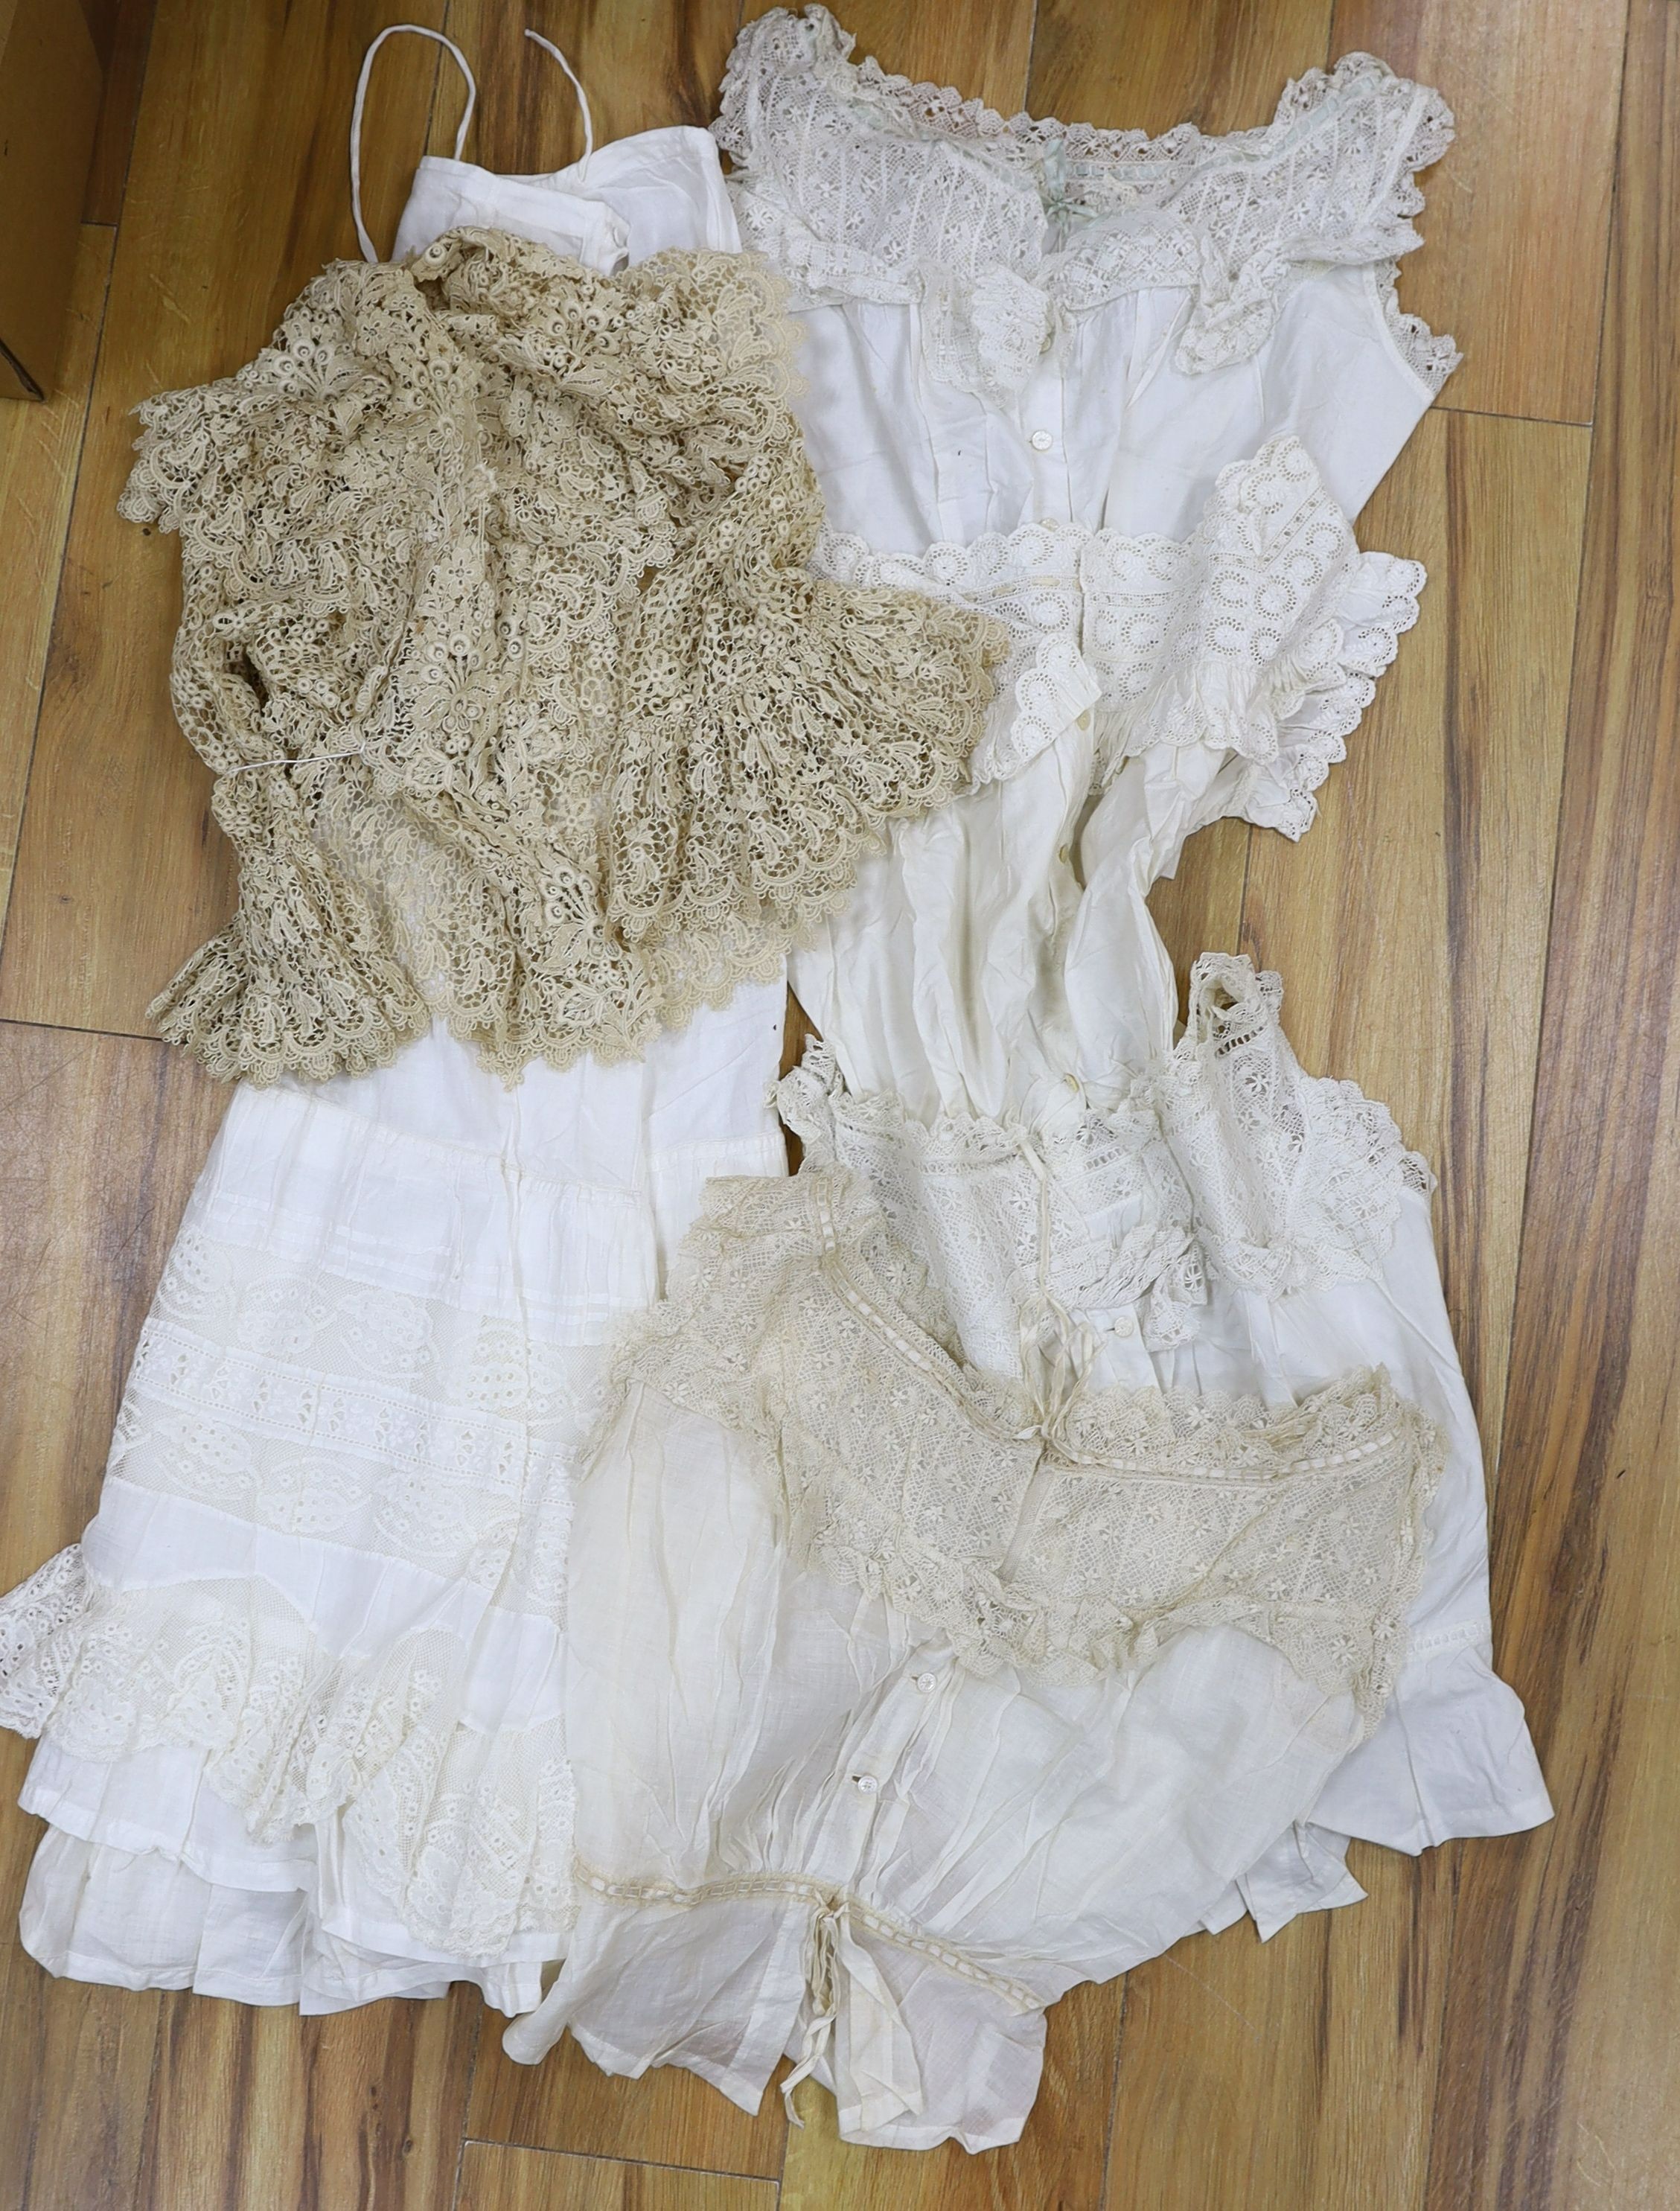 Five Victorian and Edwardian lace inserted camisole tops, a cream chemical lace jacket and a whitework and lace petticoat